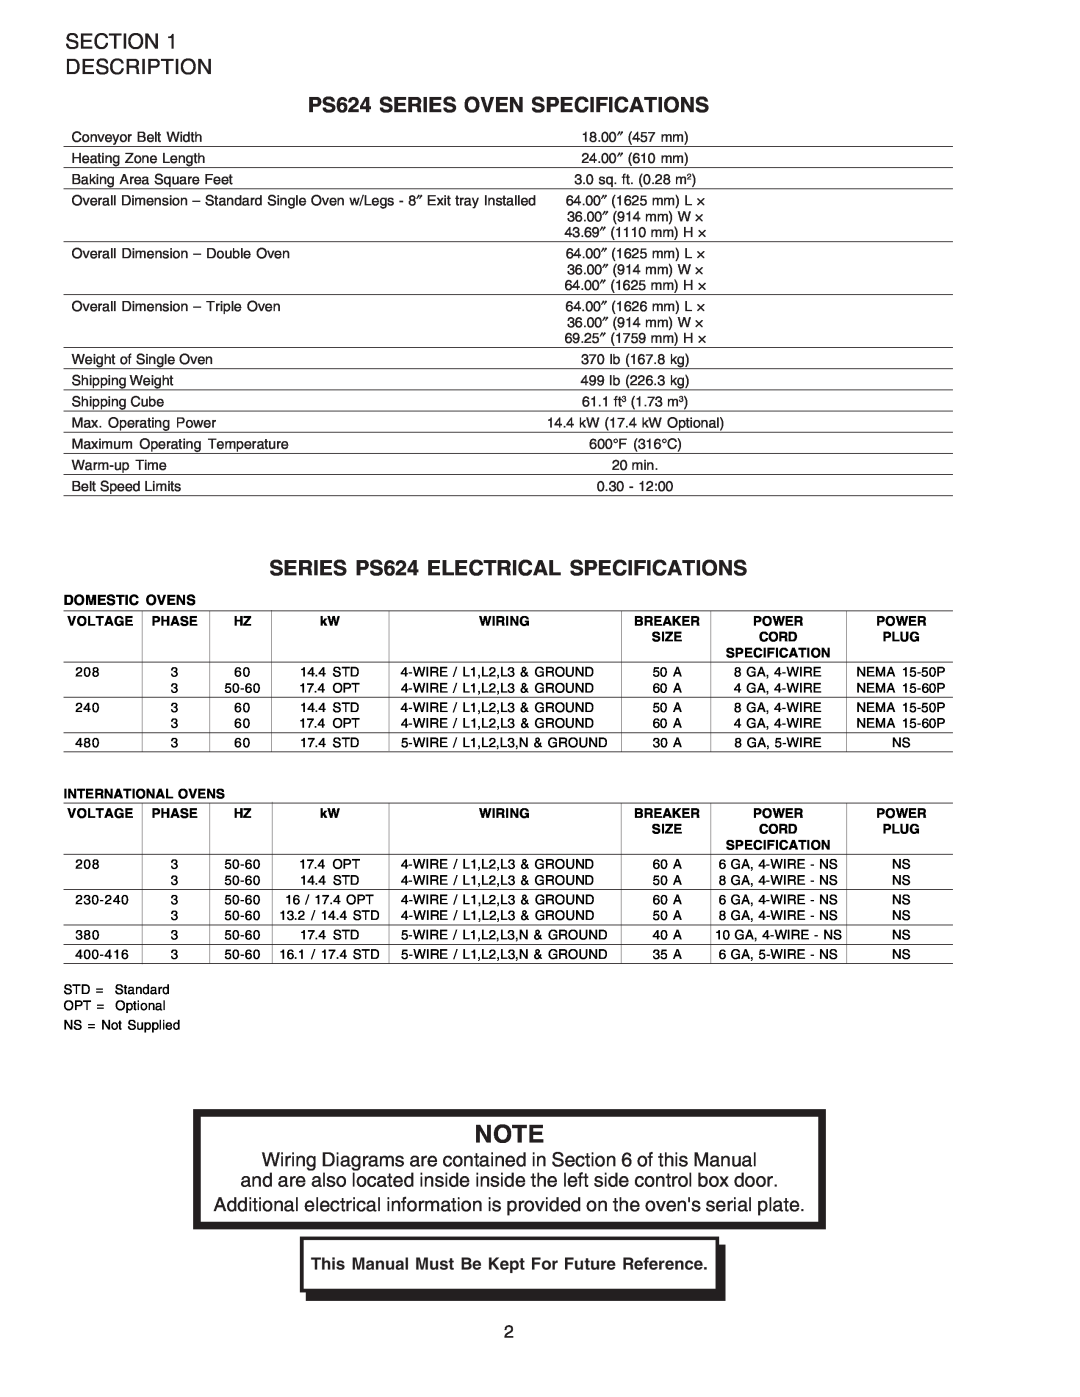 Middleby Marshall PS624E PS624 SERIES OVEN SPECIFICATIONS, SERIES PS624 ELECTRICAL SPECIFICATIONS, Section Description 